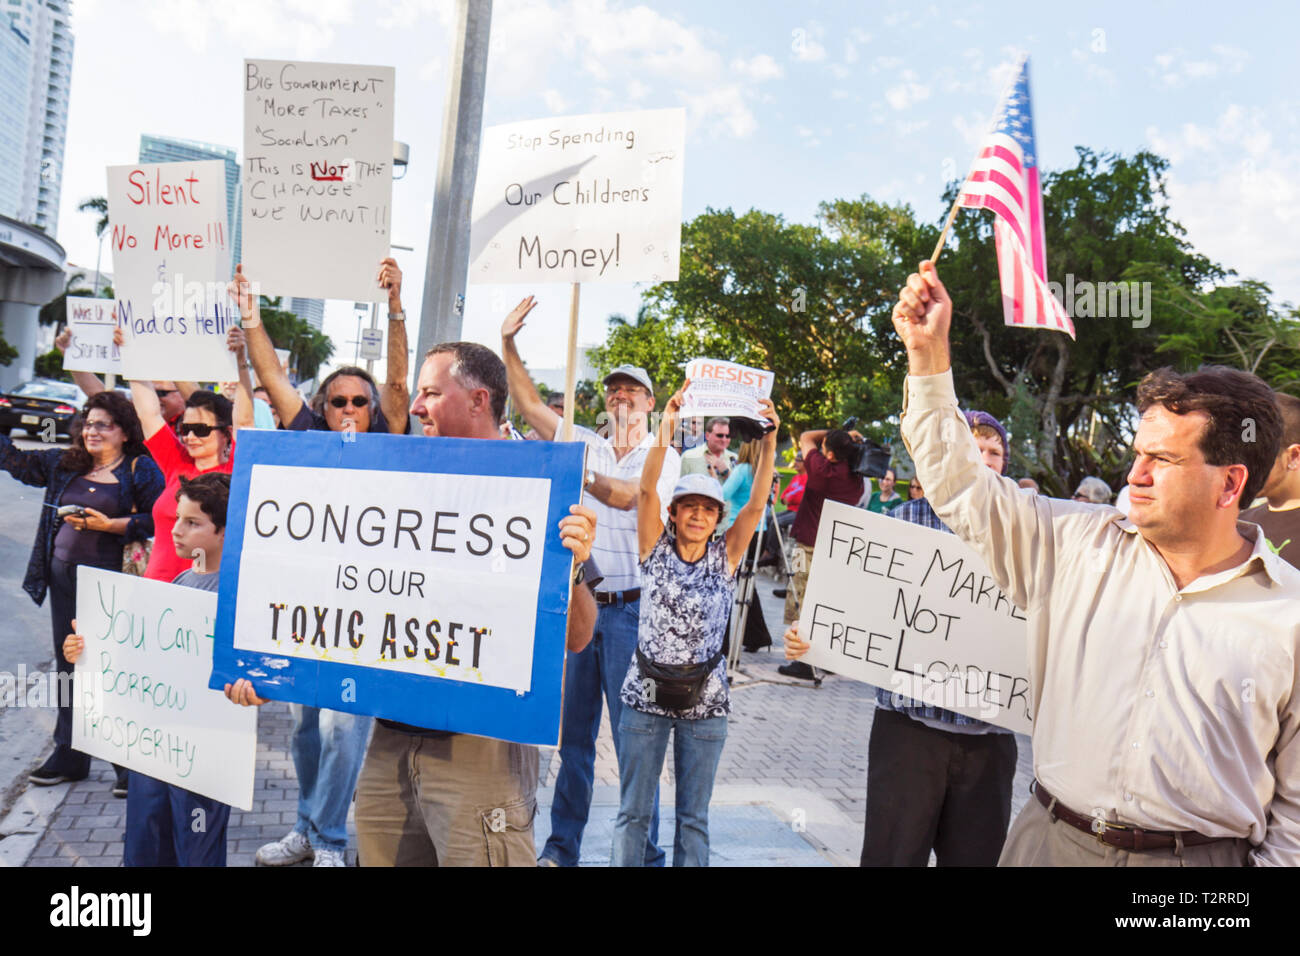 Miami Florida,Biscayne Boulevard,TEA tax party,protest,anti,government,Republican Party,right,sign,logo,protester,free speech,opinion,dissent,adult ad Stock Photo